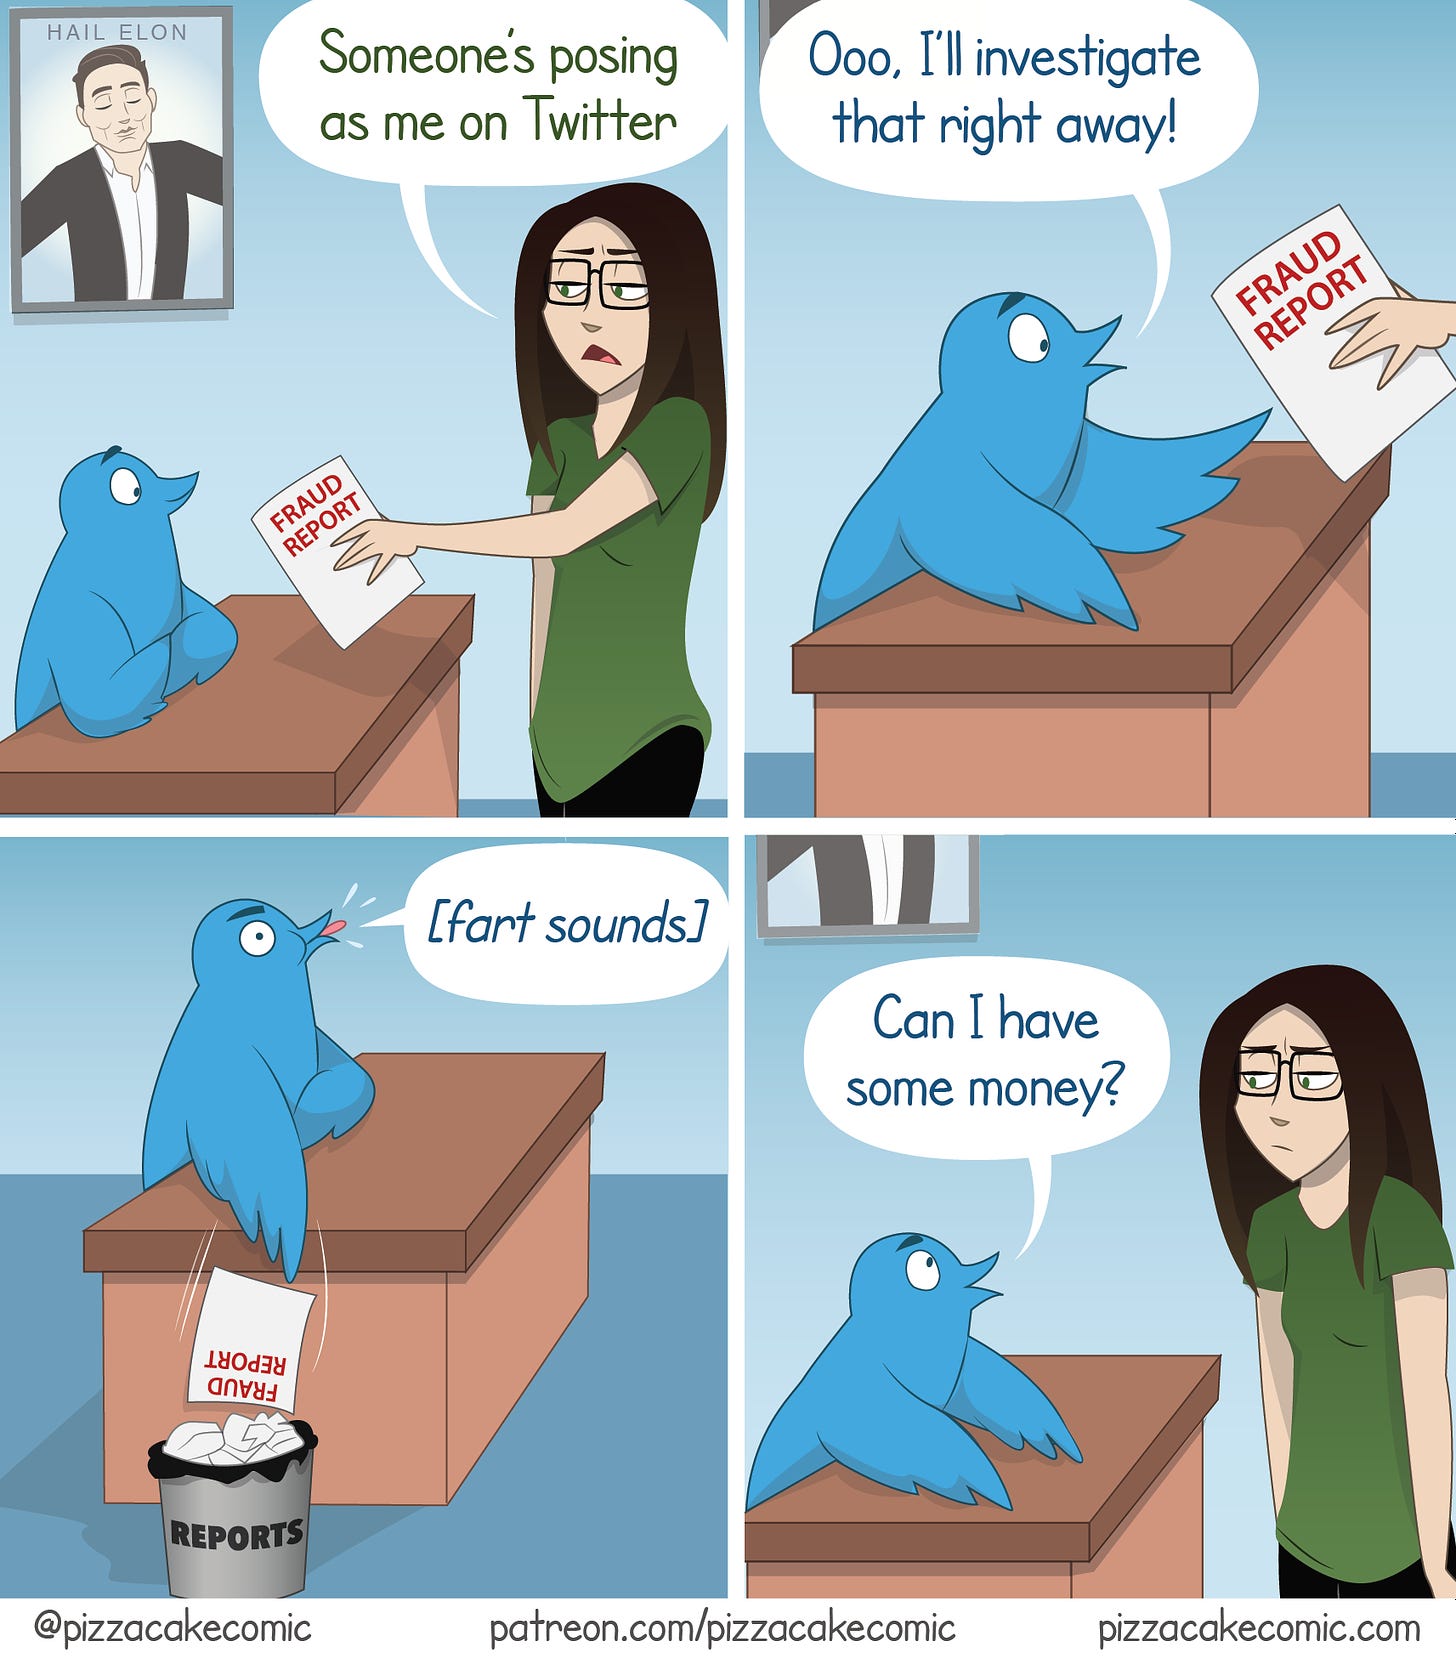 irst panel: a lady in a green shirt says “someone’s posing as me on Twitter”. The lady is holding a fraud report to give to the blue Twitter bird with crossed arms. Second Panel: The Blue Twitter bird then says “Ooo, I’ll investigate that right away” hands reaching out to grab the fraud report. Third panel: The bird then chucks the fraud report in the trash can labeled “reports” while making a fart sound with their mouth and fourth panel the blue bird then says “Can I have some money?” looking at the lady. The lady has a “wtf” look.  Thanks @4NEMOKAZUHA for ALT description. 